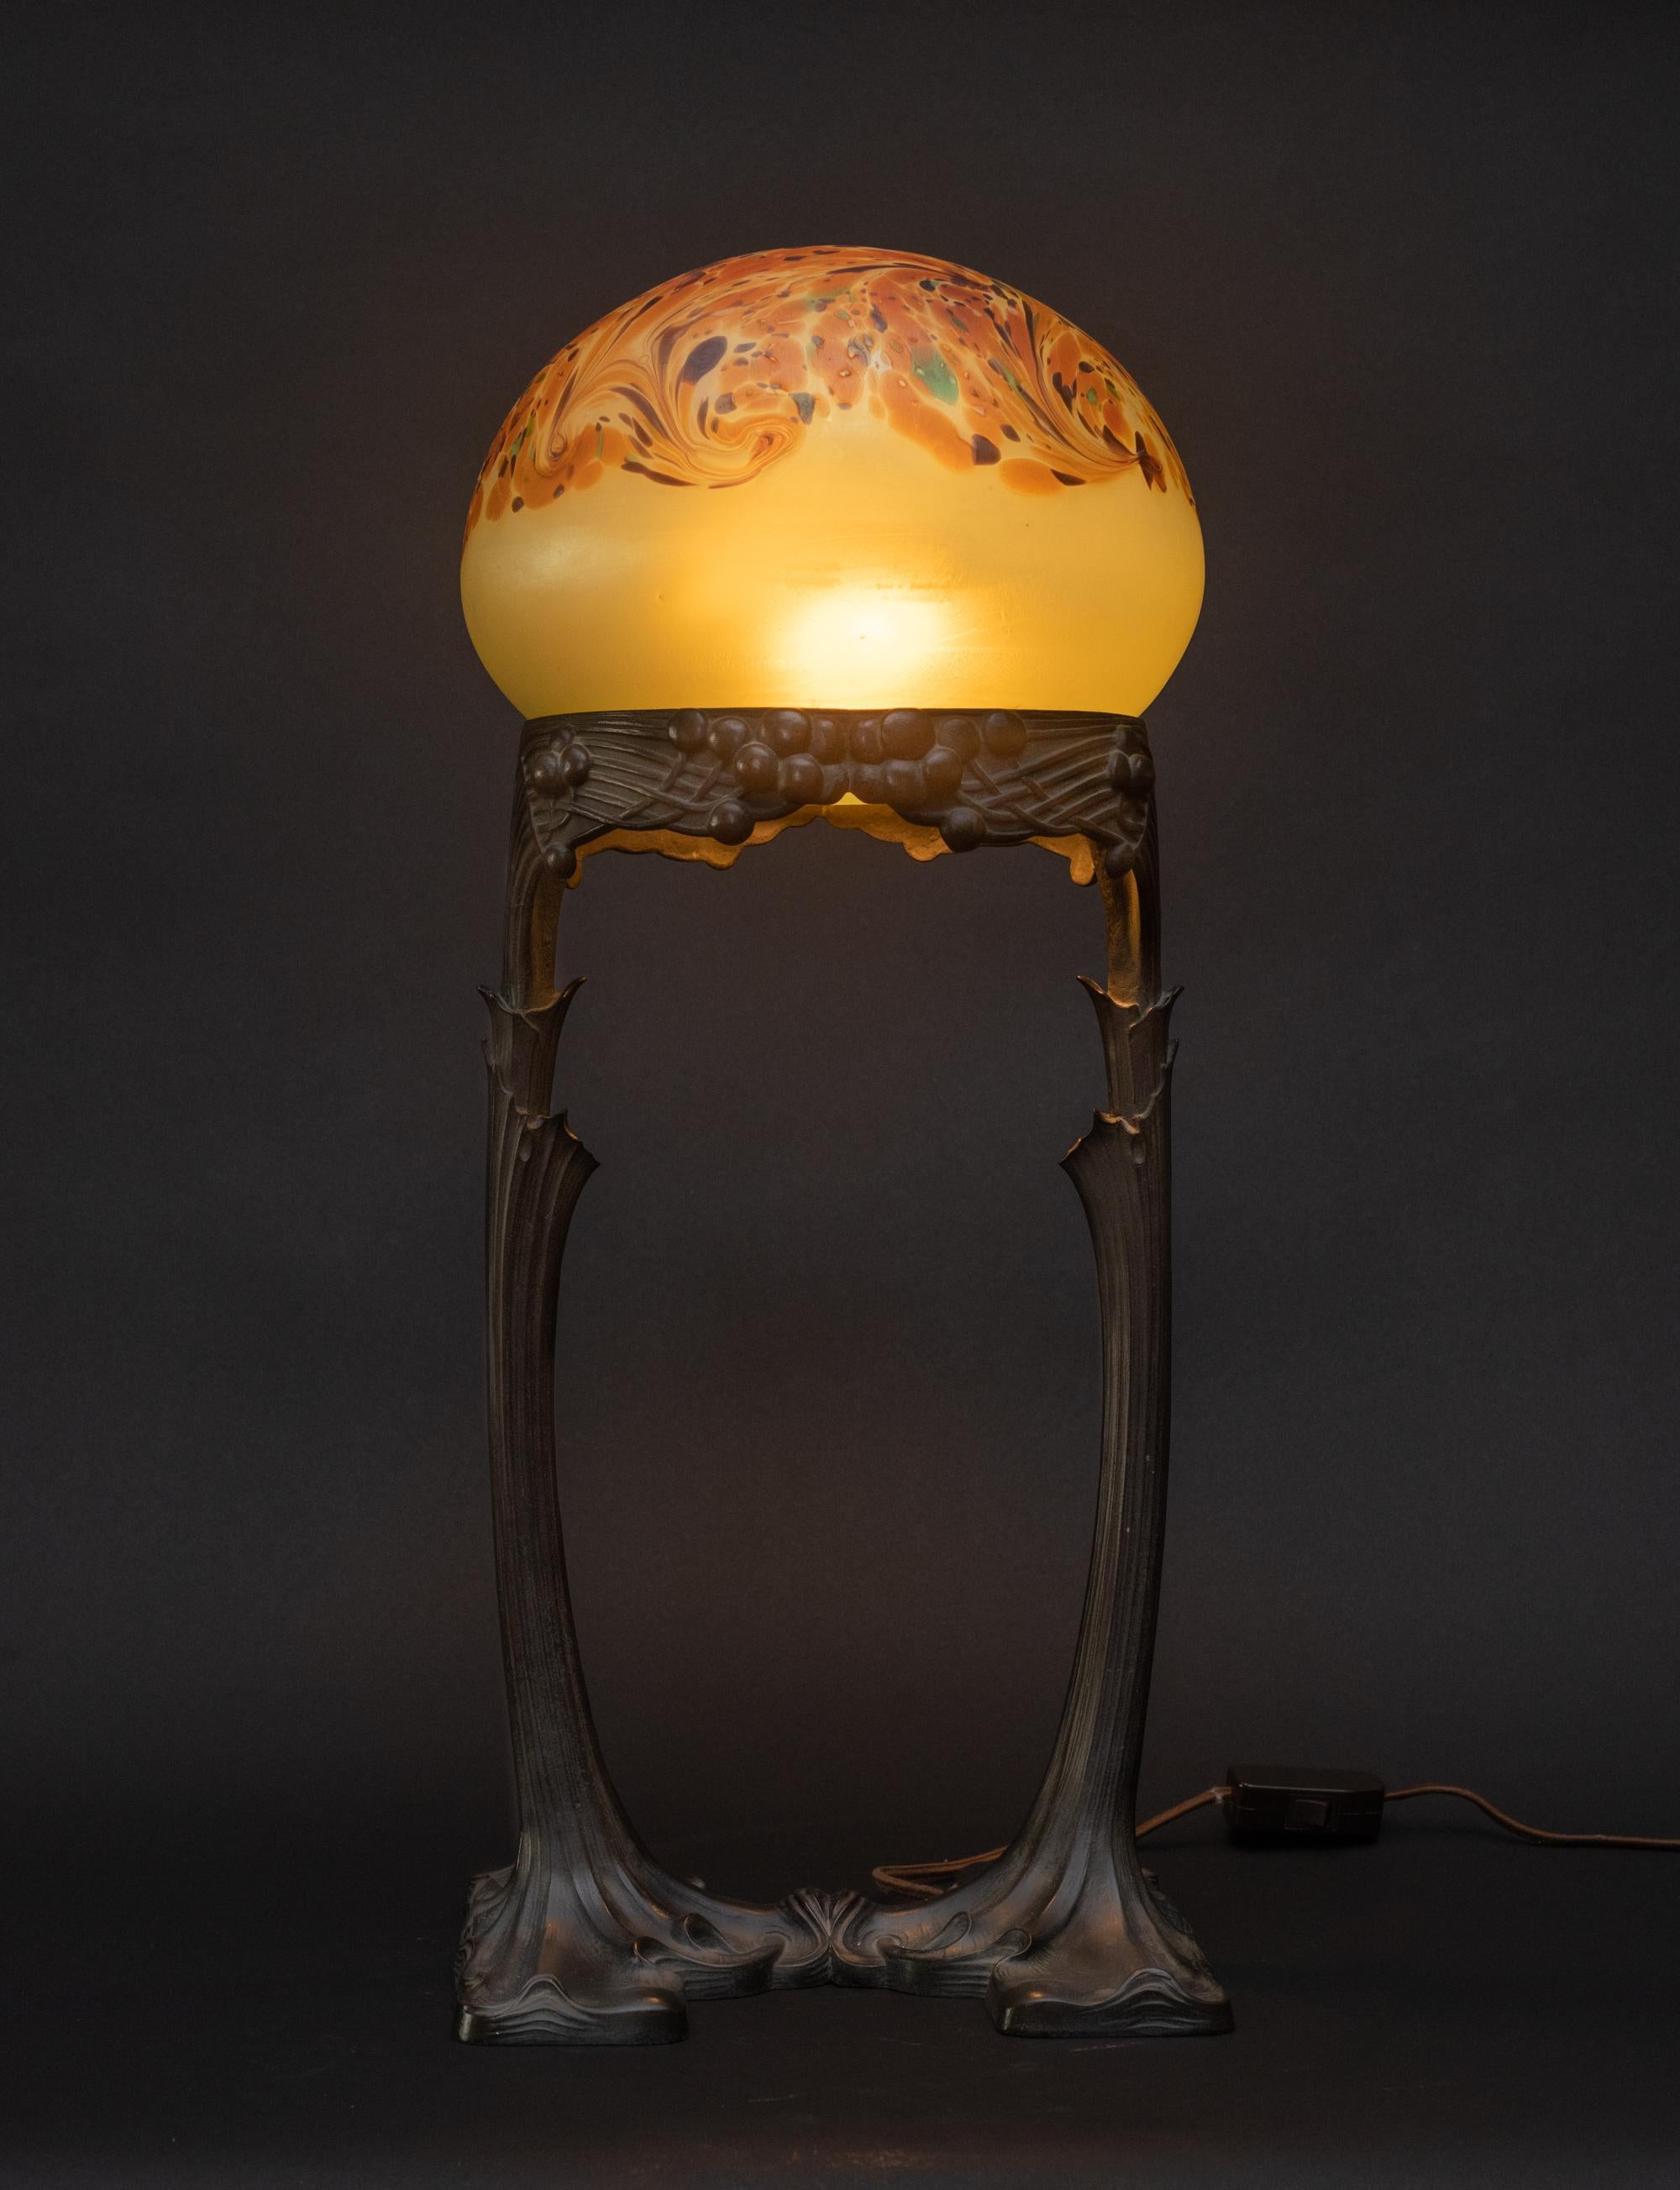 Art Nouveau BALLOON GLASS TABLE LAMP, by Gustav Gurschner and Johann Loetz Witwe, c. 1904, the glass dome in a frosted yellow iridescent ground is crowned by orange abstract swirls accented by dabs of aubergine and green; it rests on a chocolate